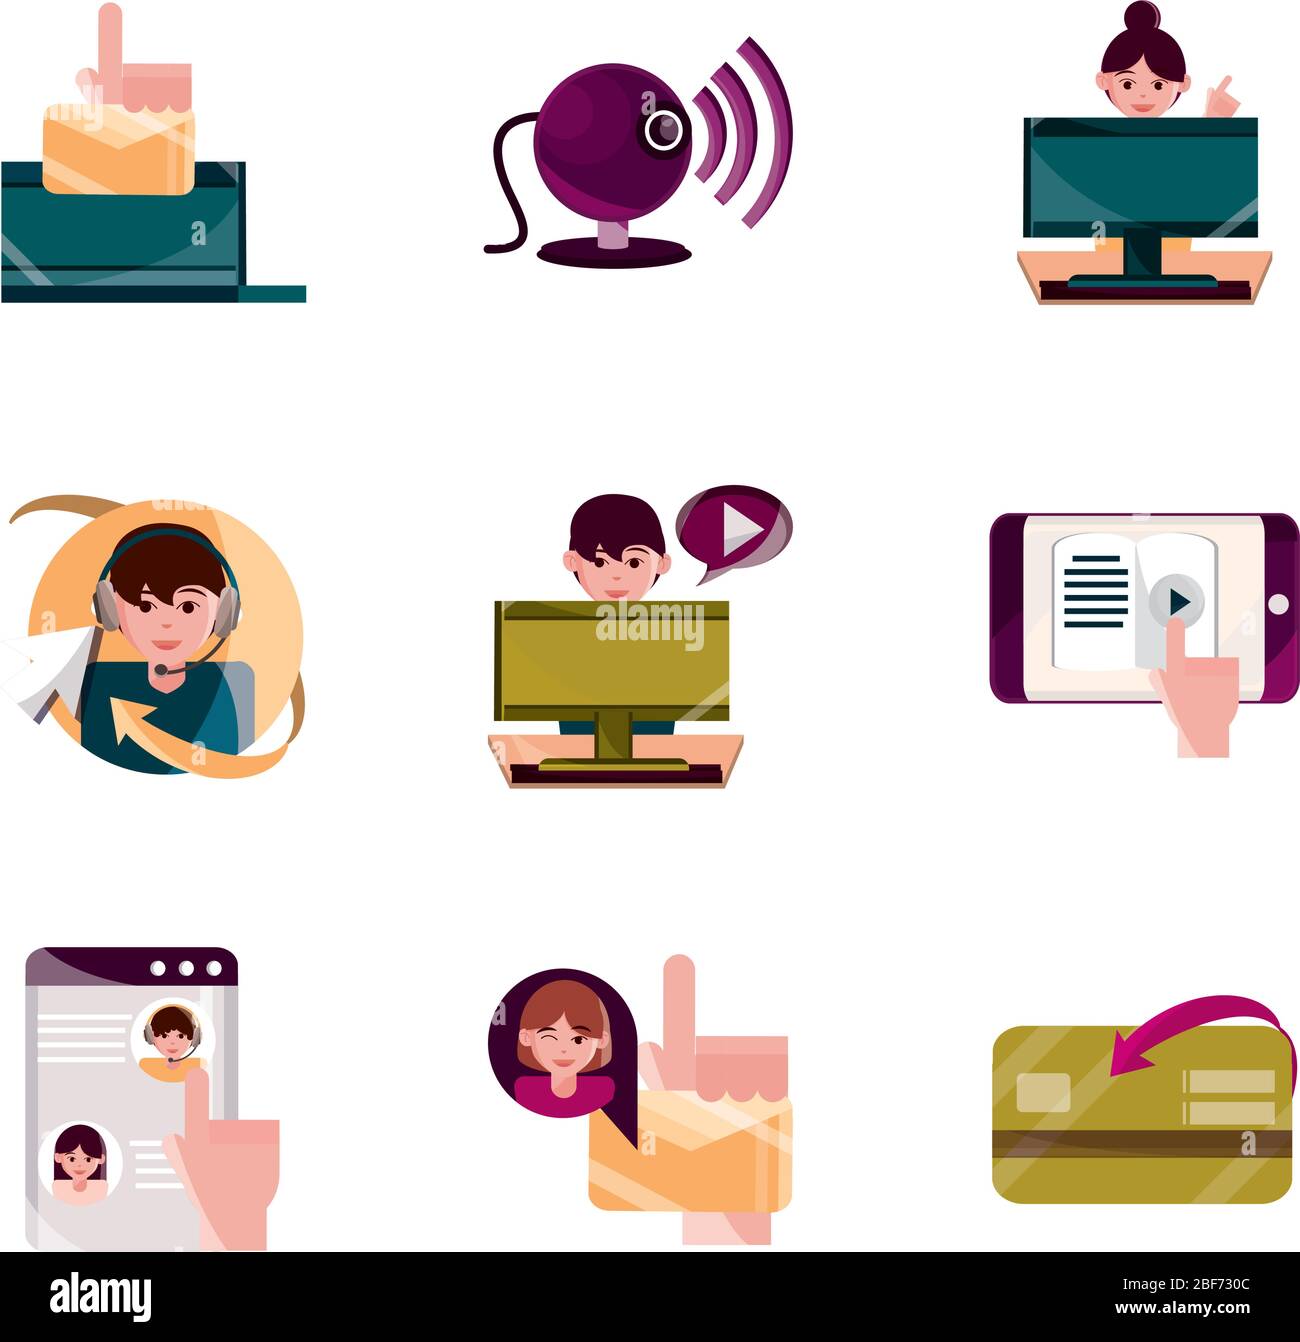 Online Activities Digital Connection Communication Set Icons